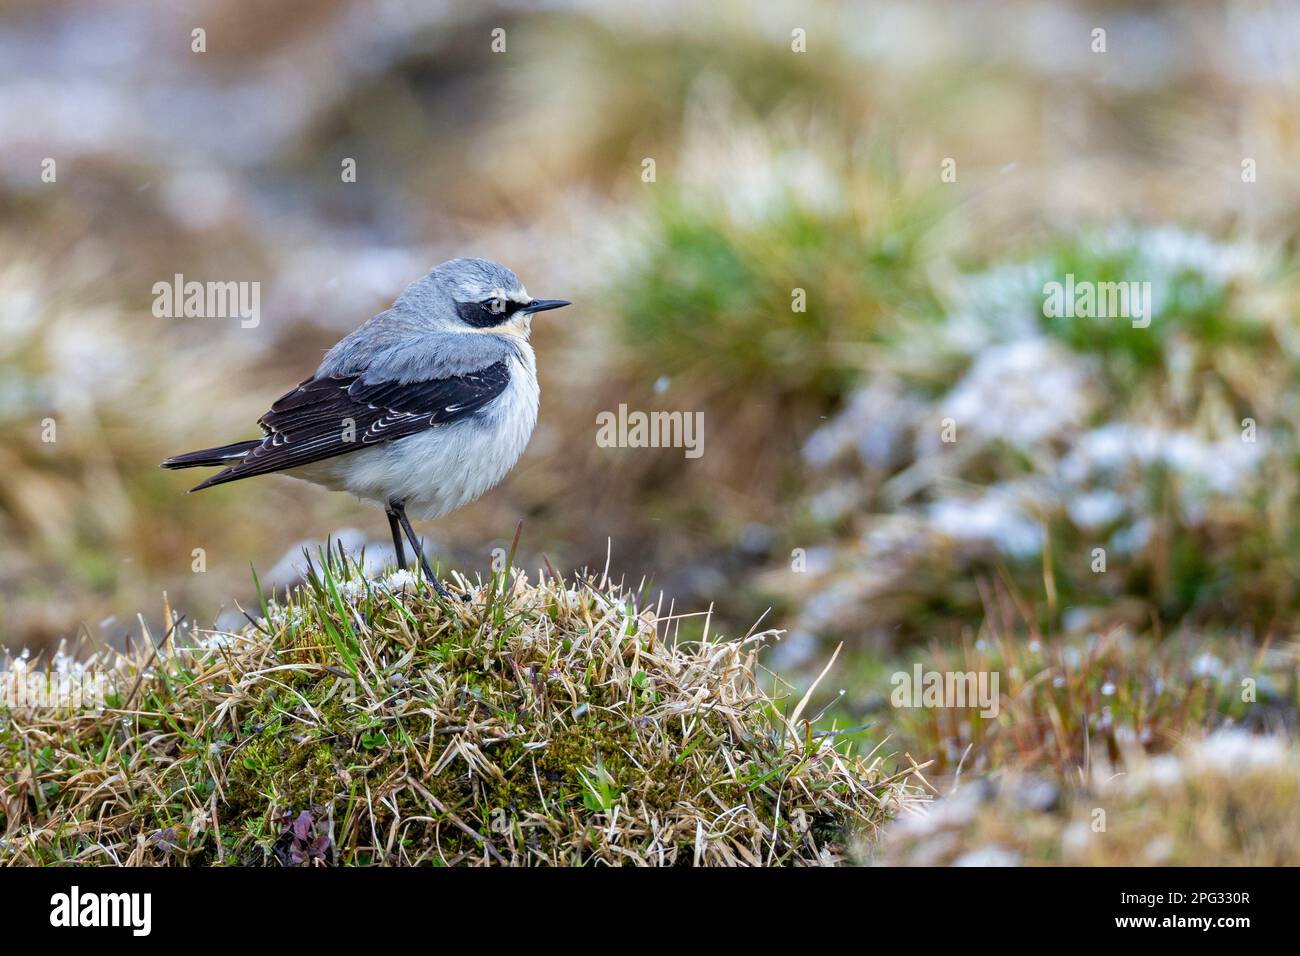 Northern Wheatear (Oenanthe oenanthe). Male standing on grass, Sweden Stock Photo